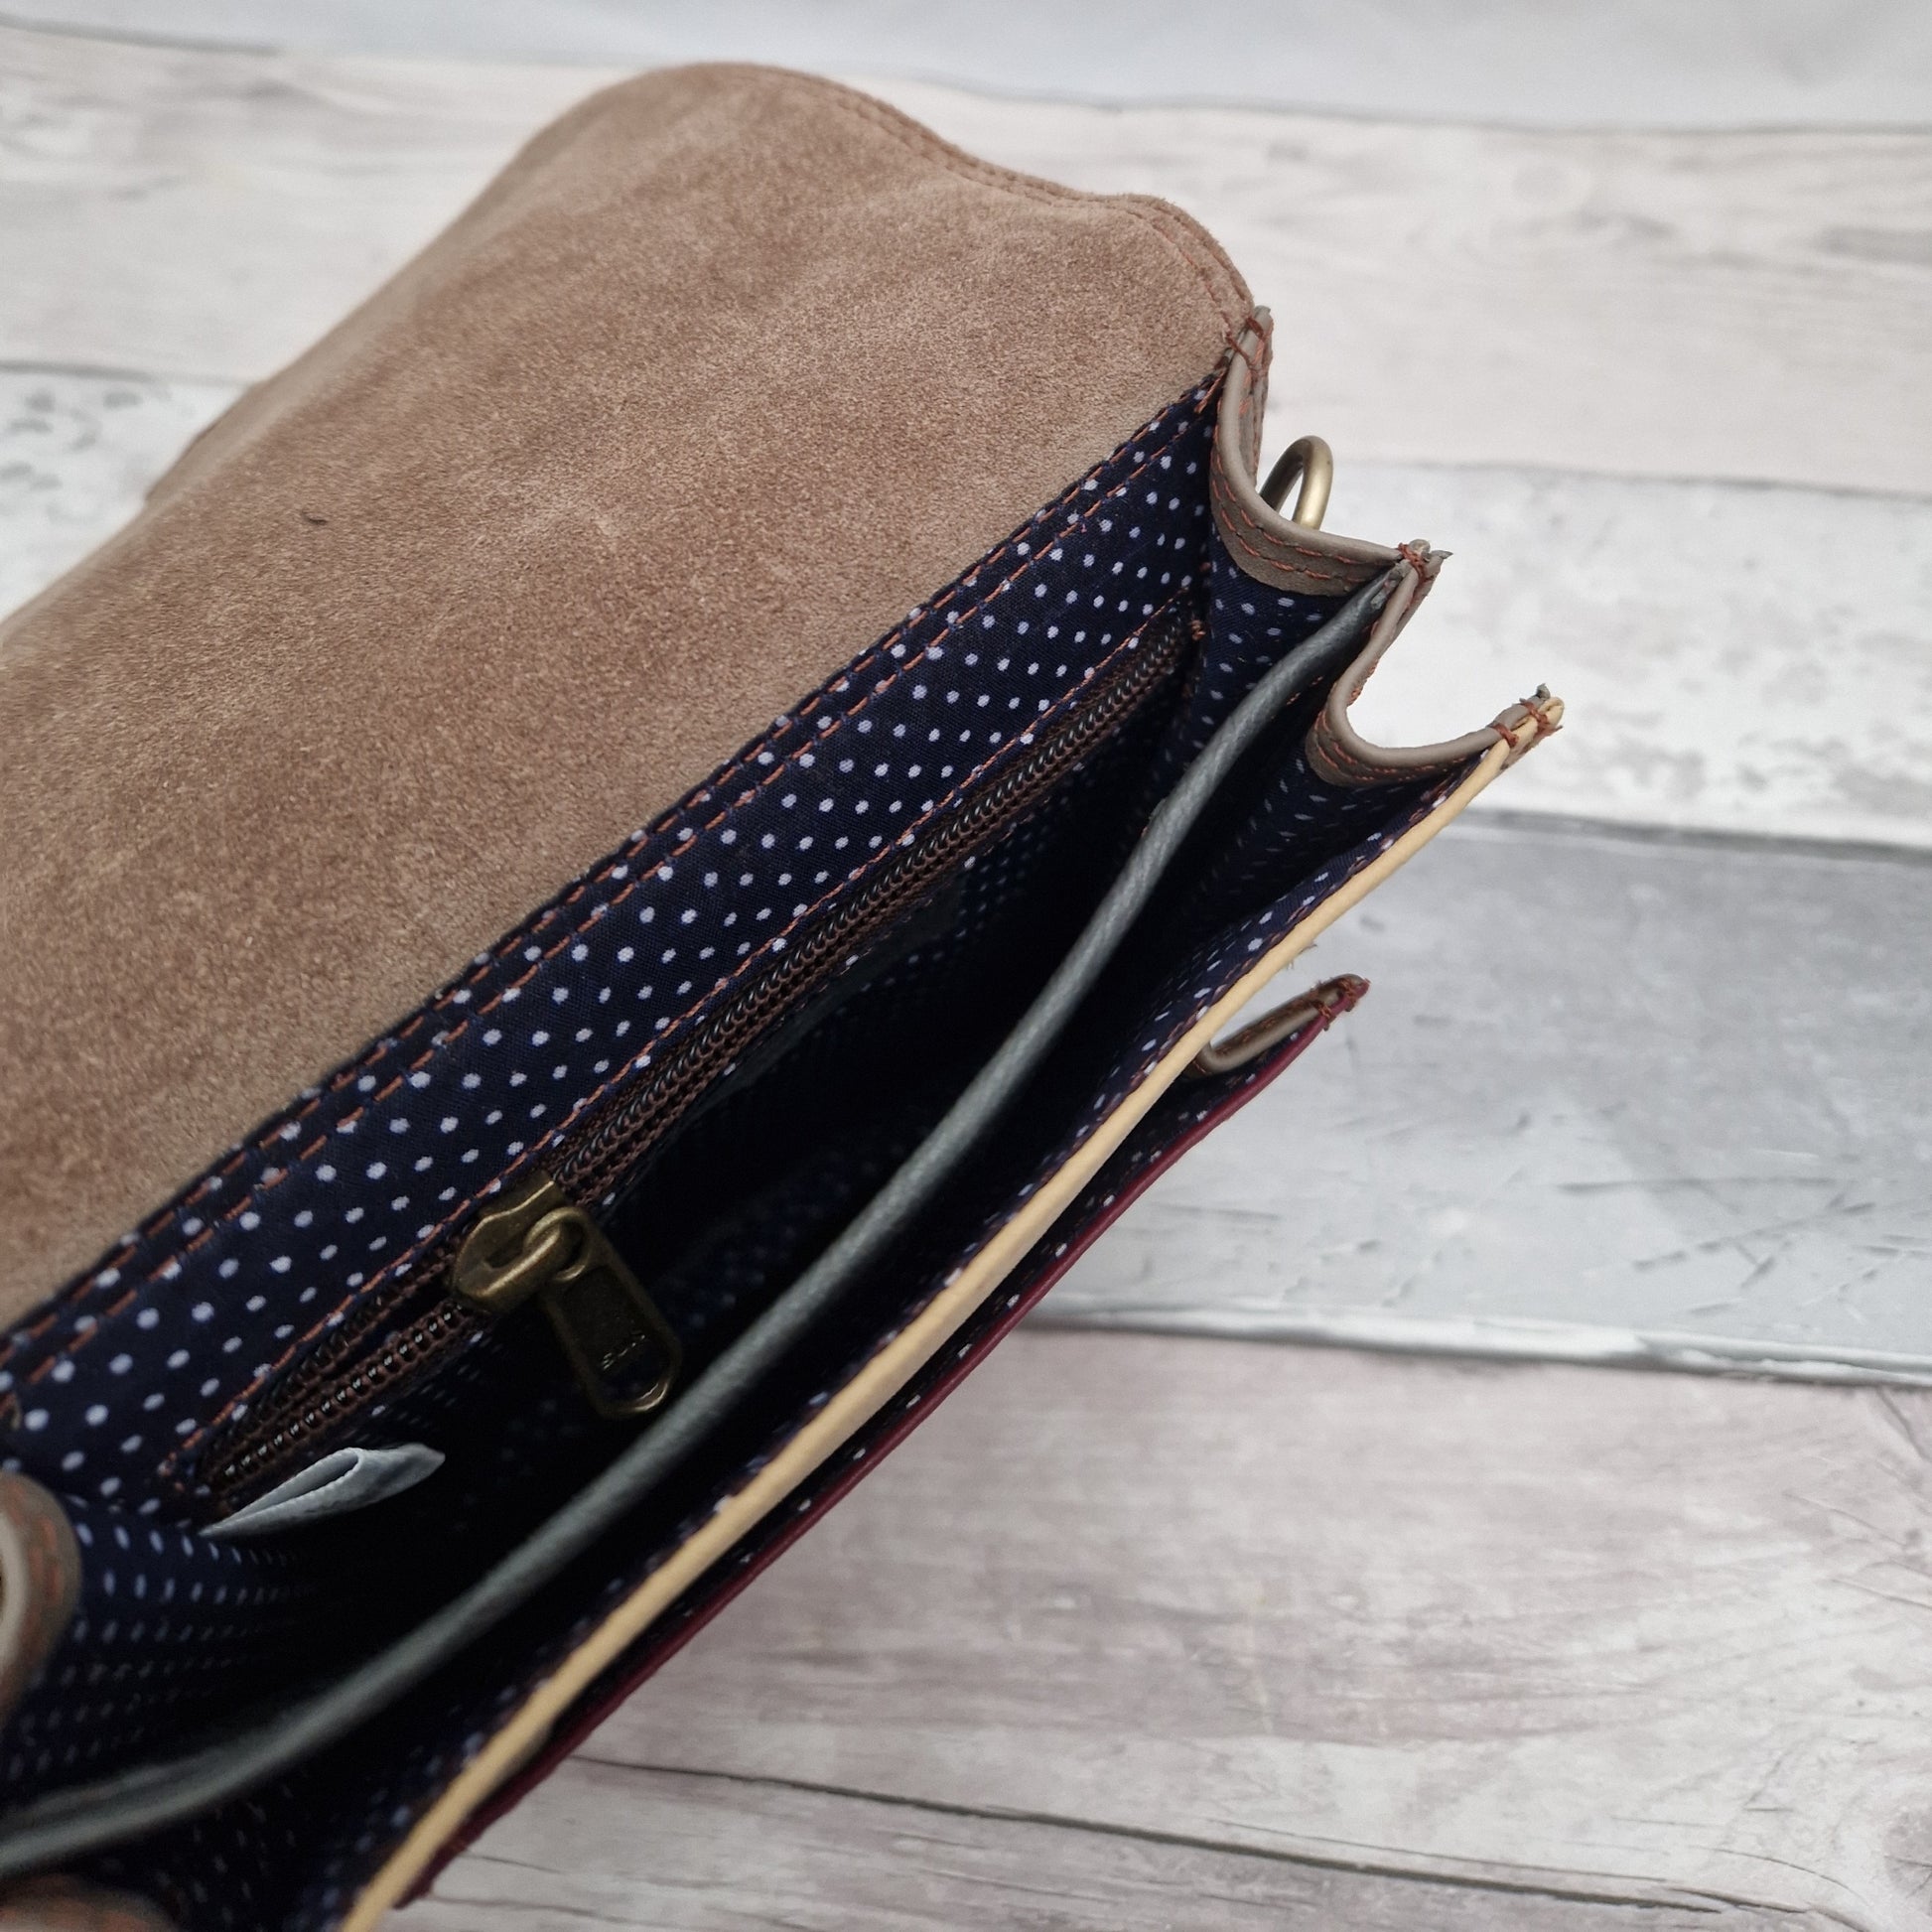 Messenger style bag made from mulit coloured leather off cuts with a textured panel of cow hide.